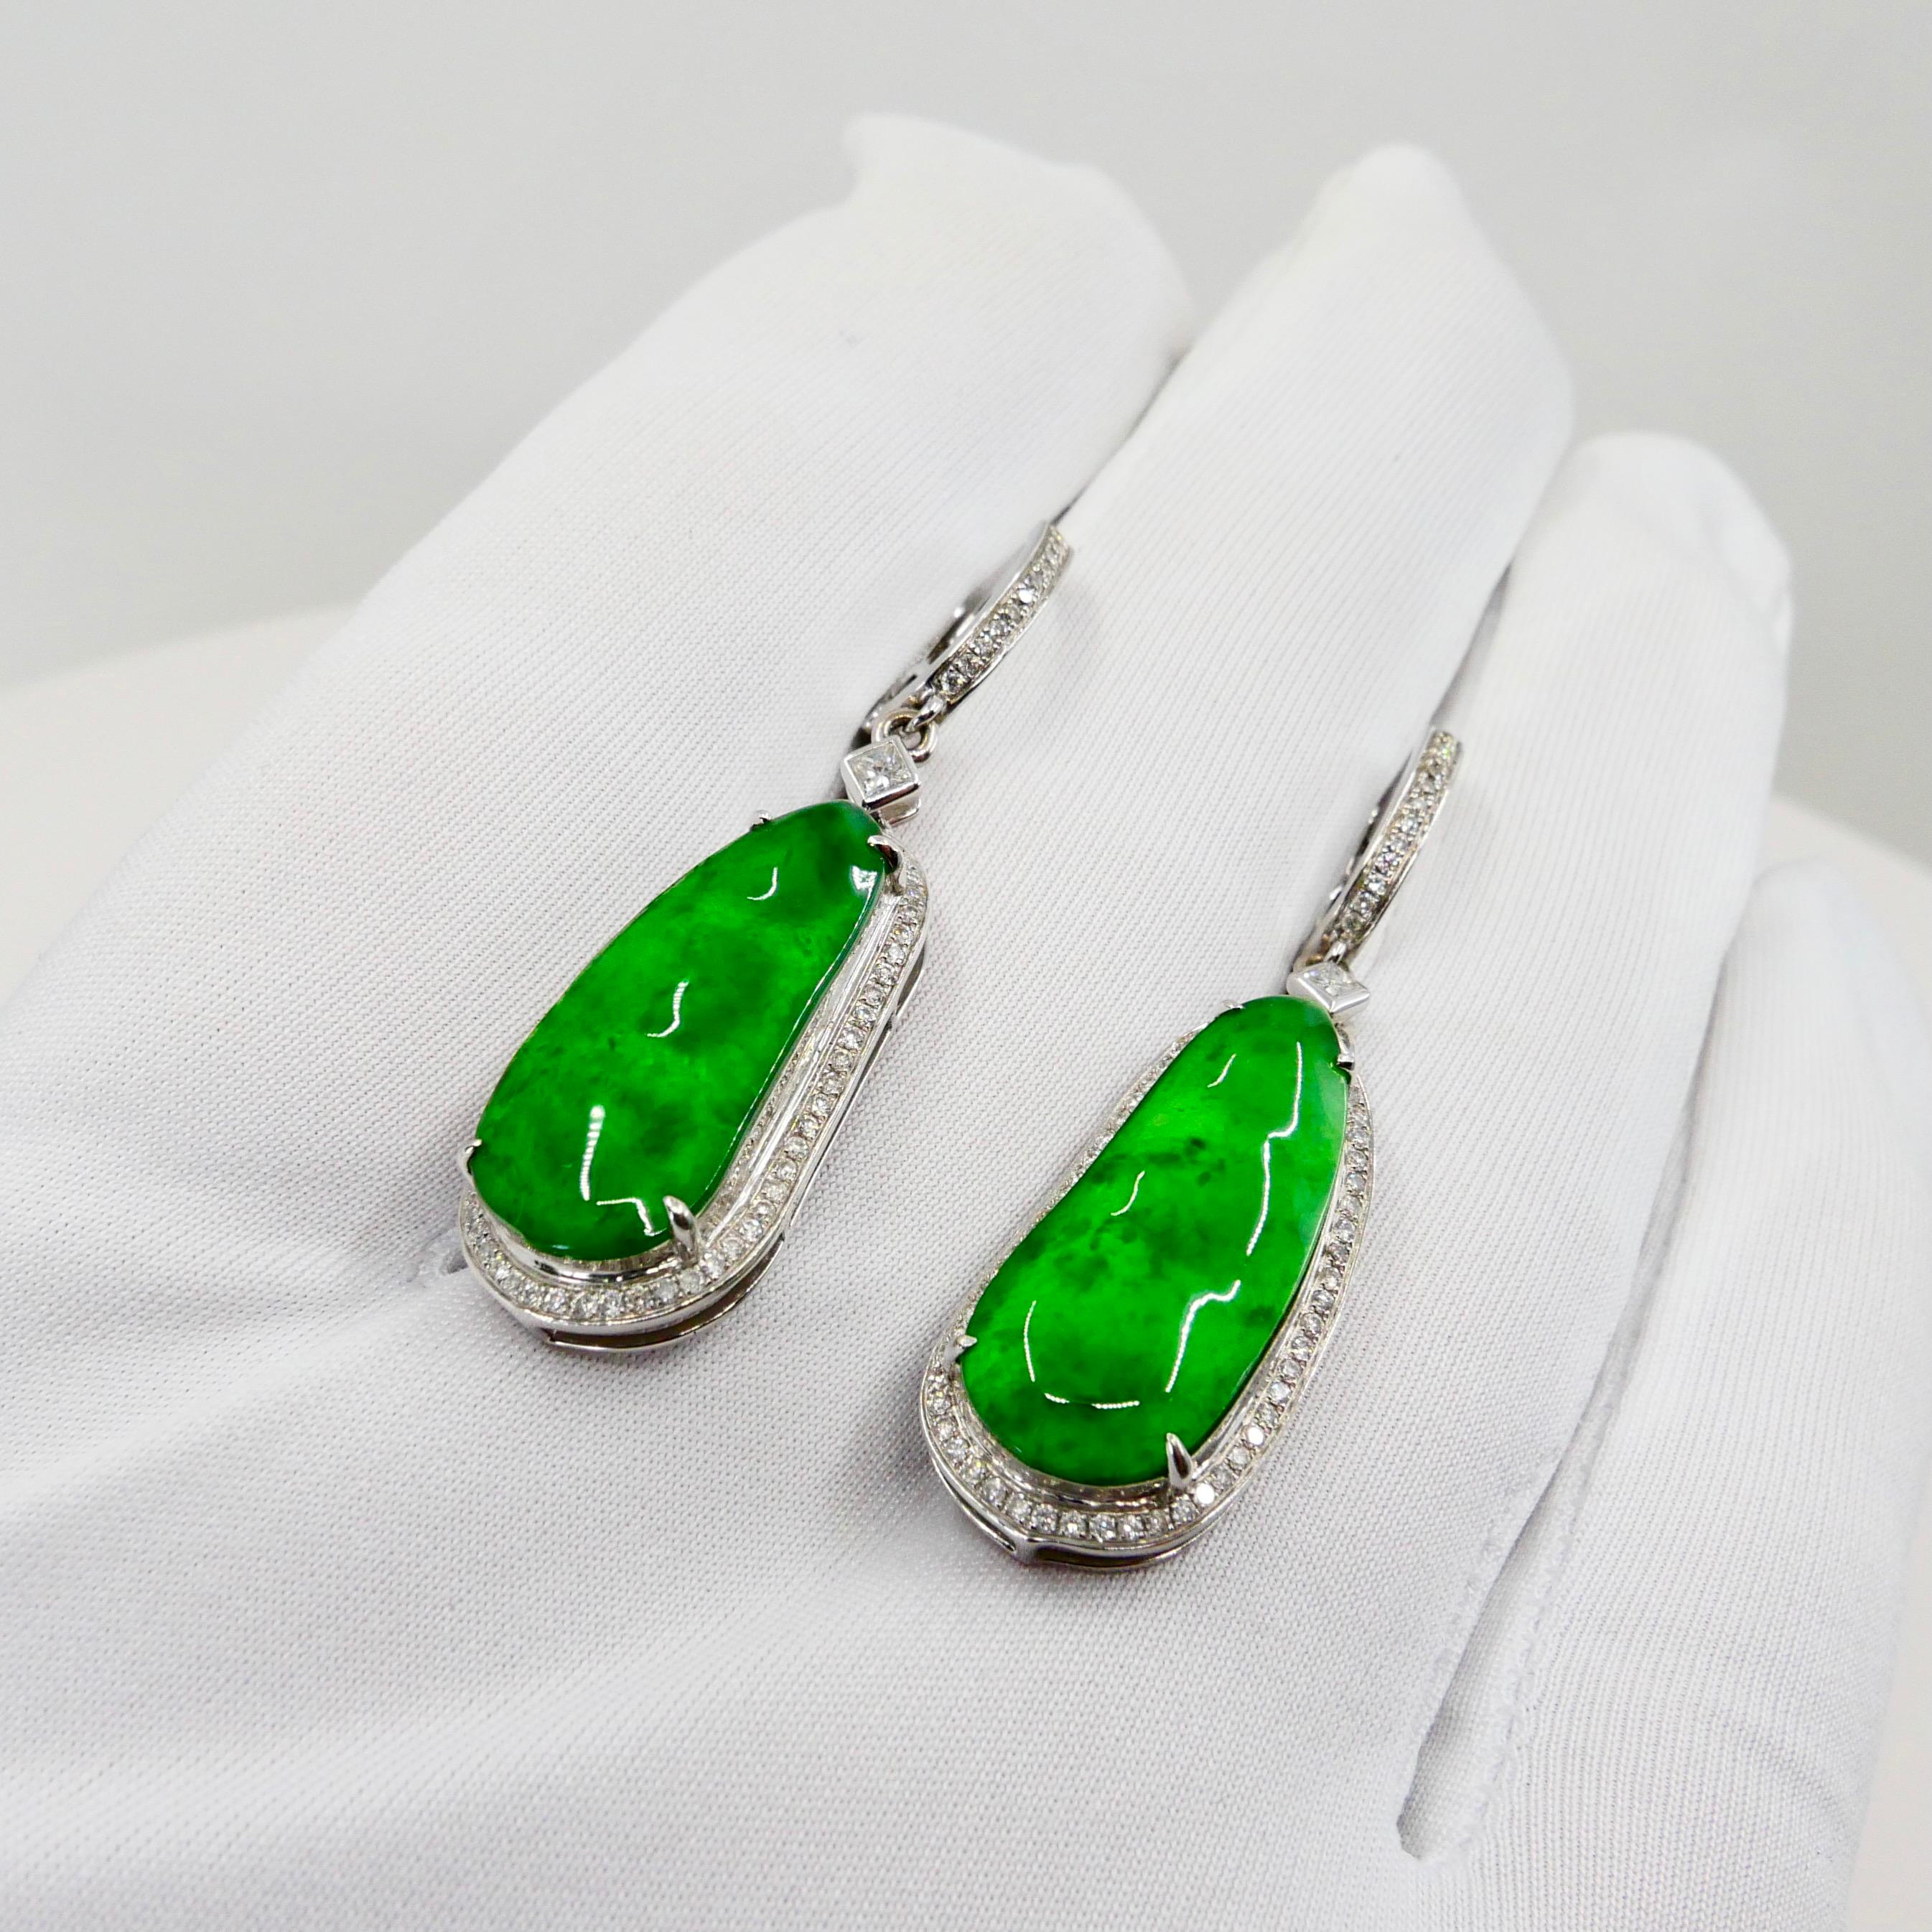 Certified Natural Type A Icy Jade Peapod Diamond Earrings, Glowing Apple Green For Sale 3